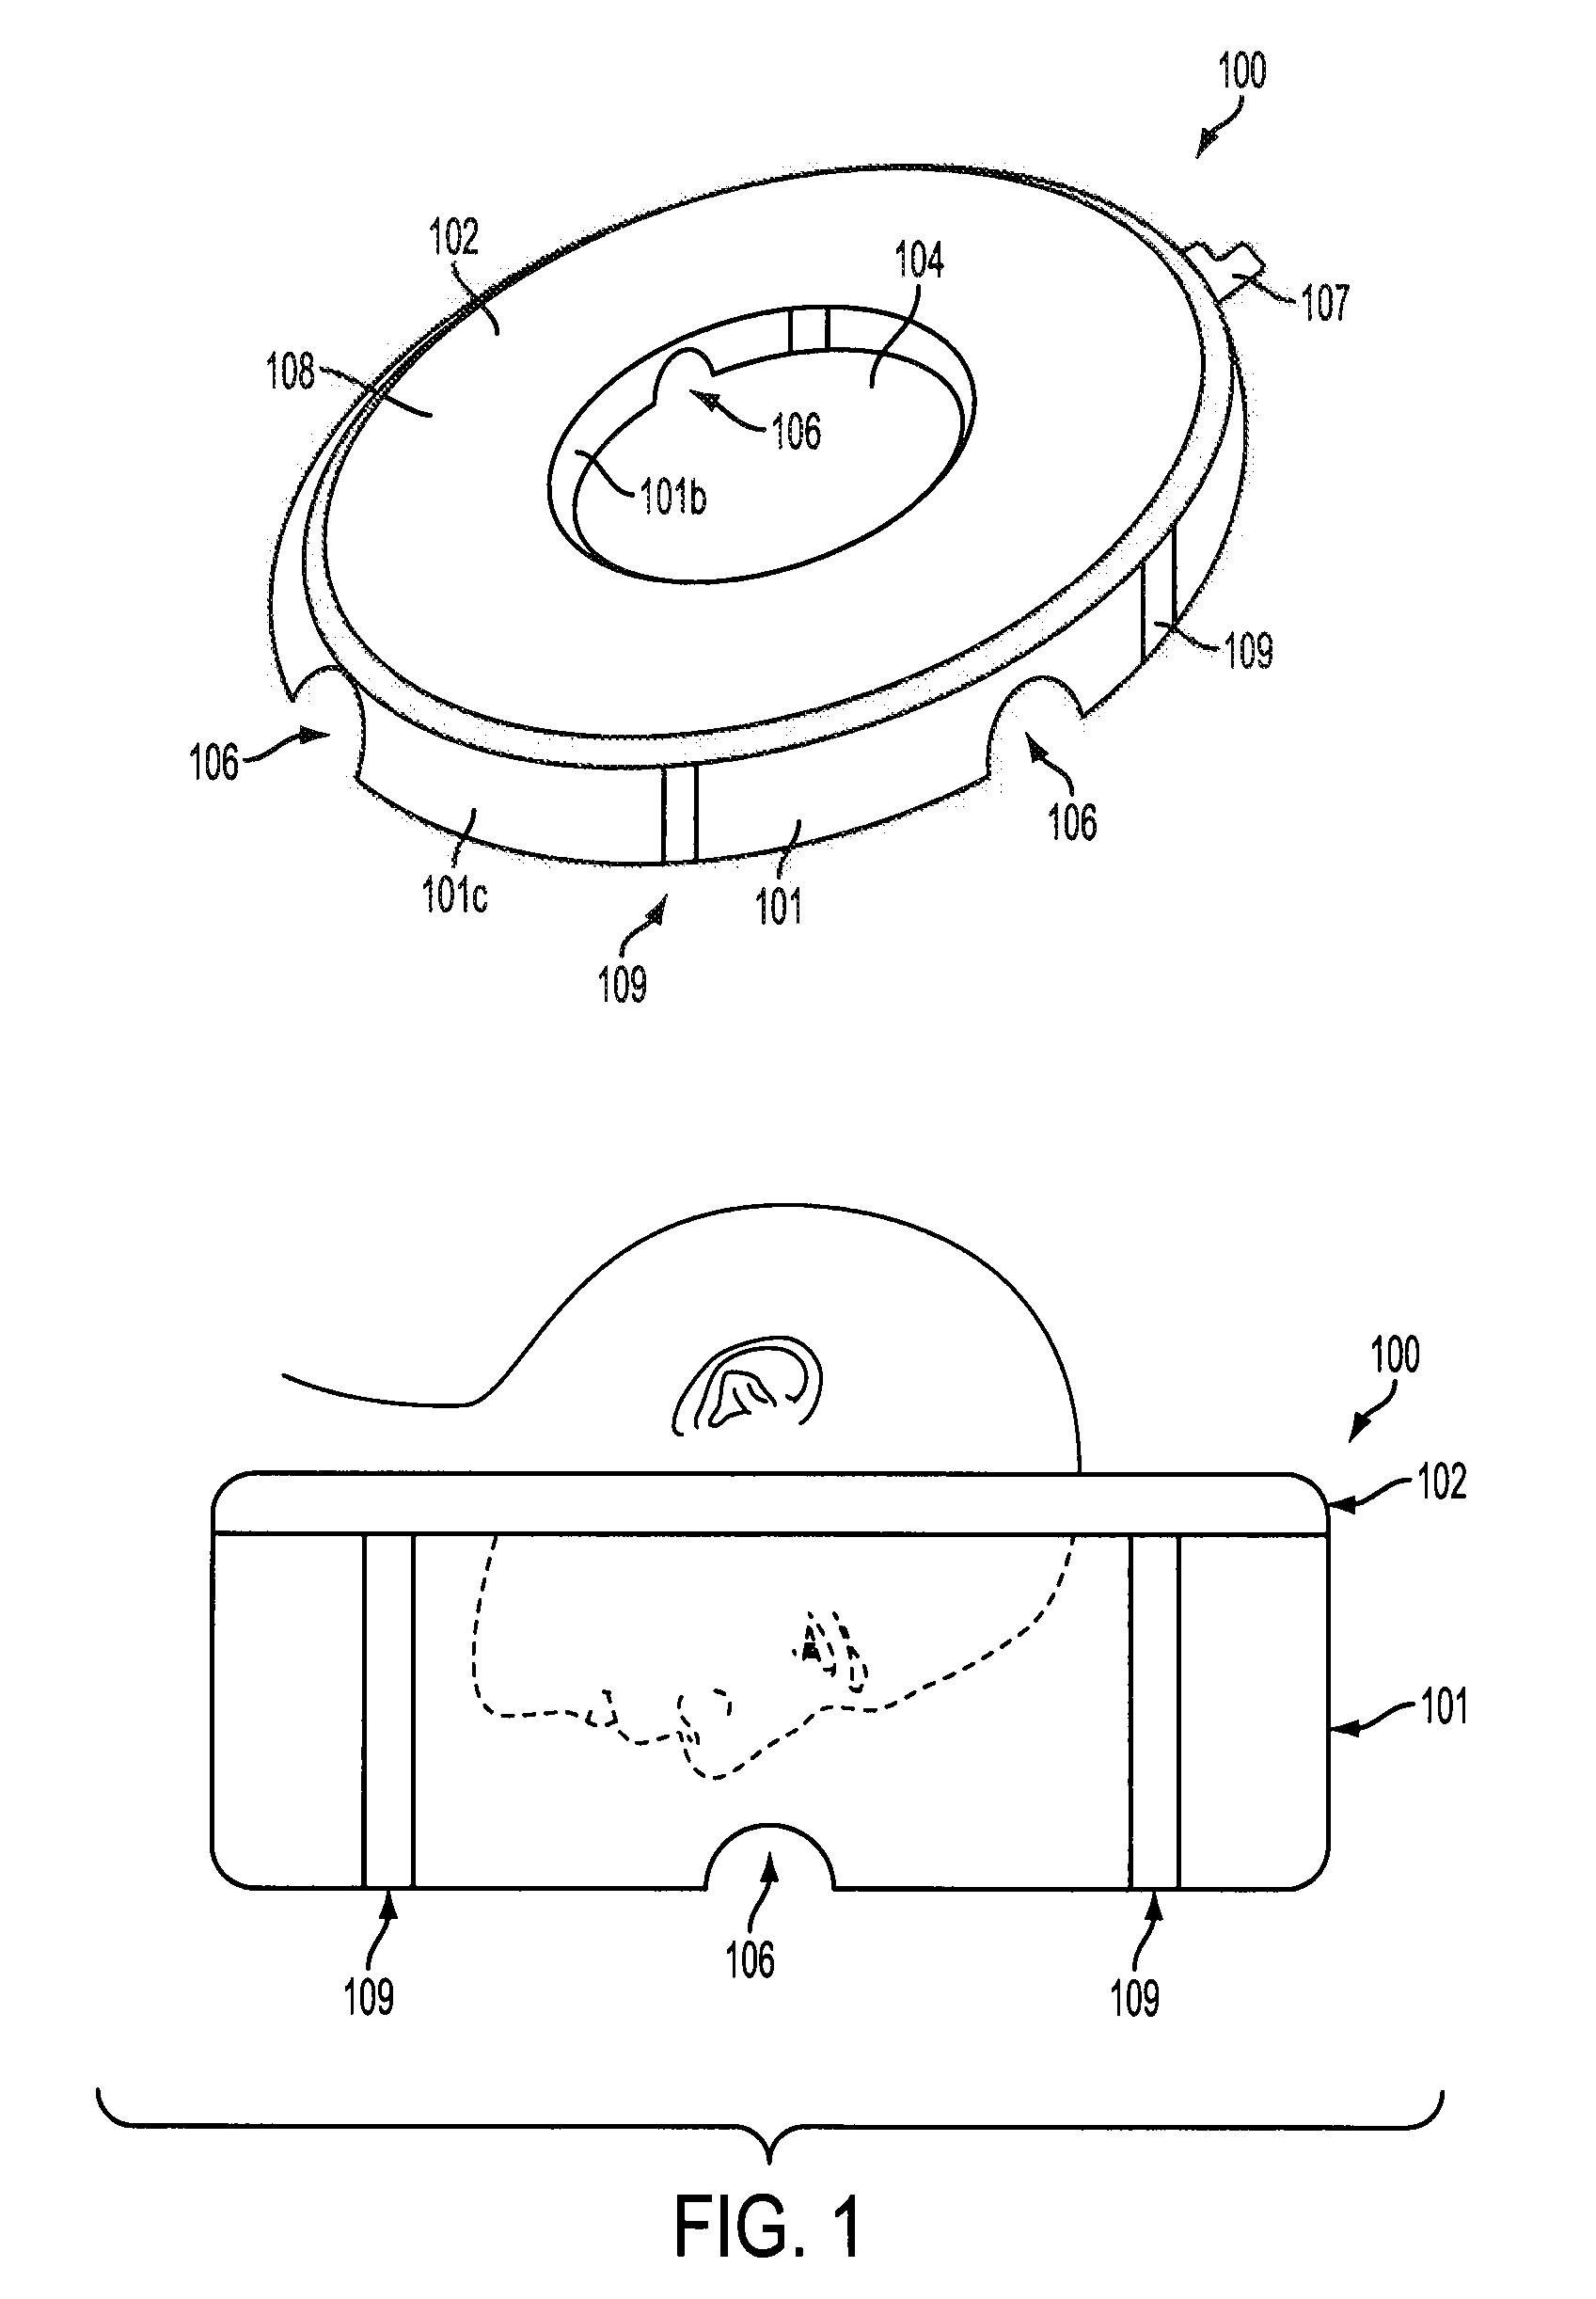 Head and neck supporting device for use while sun tanning, resting prone during massage without a massage table